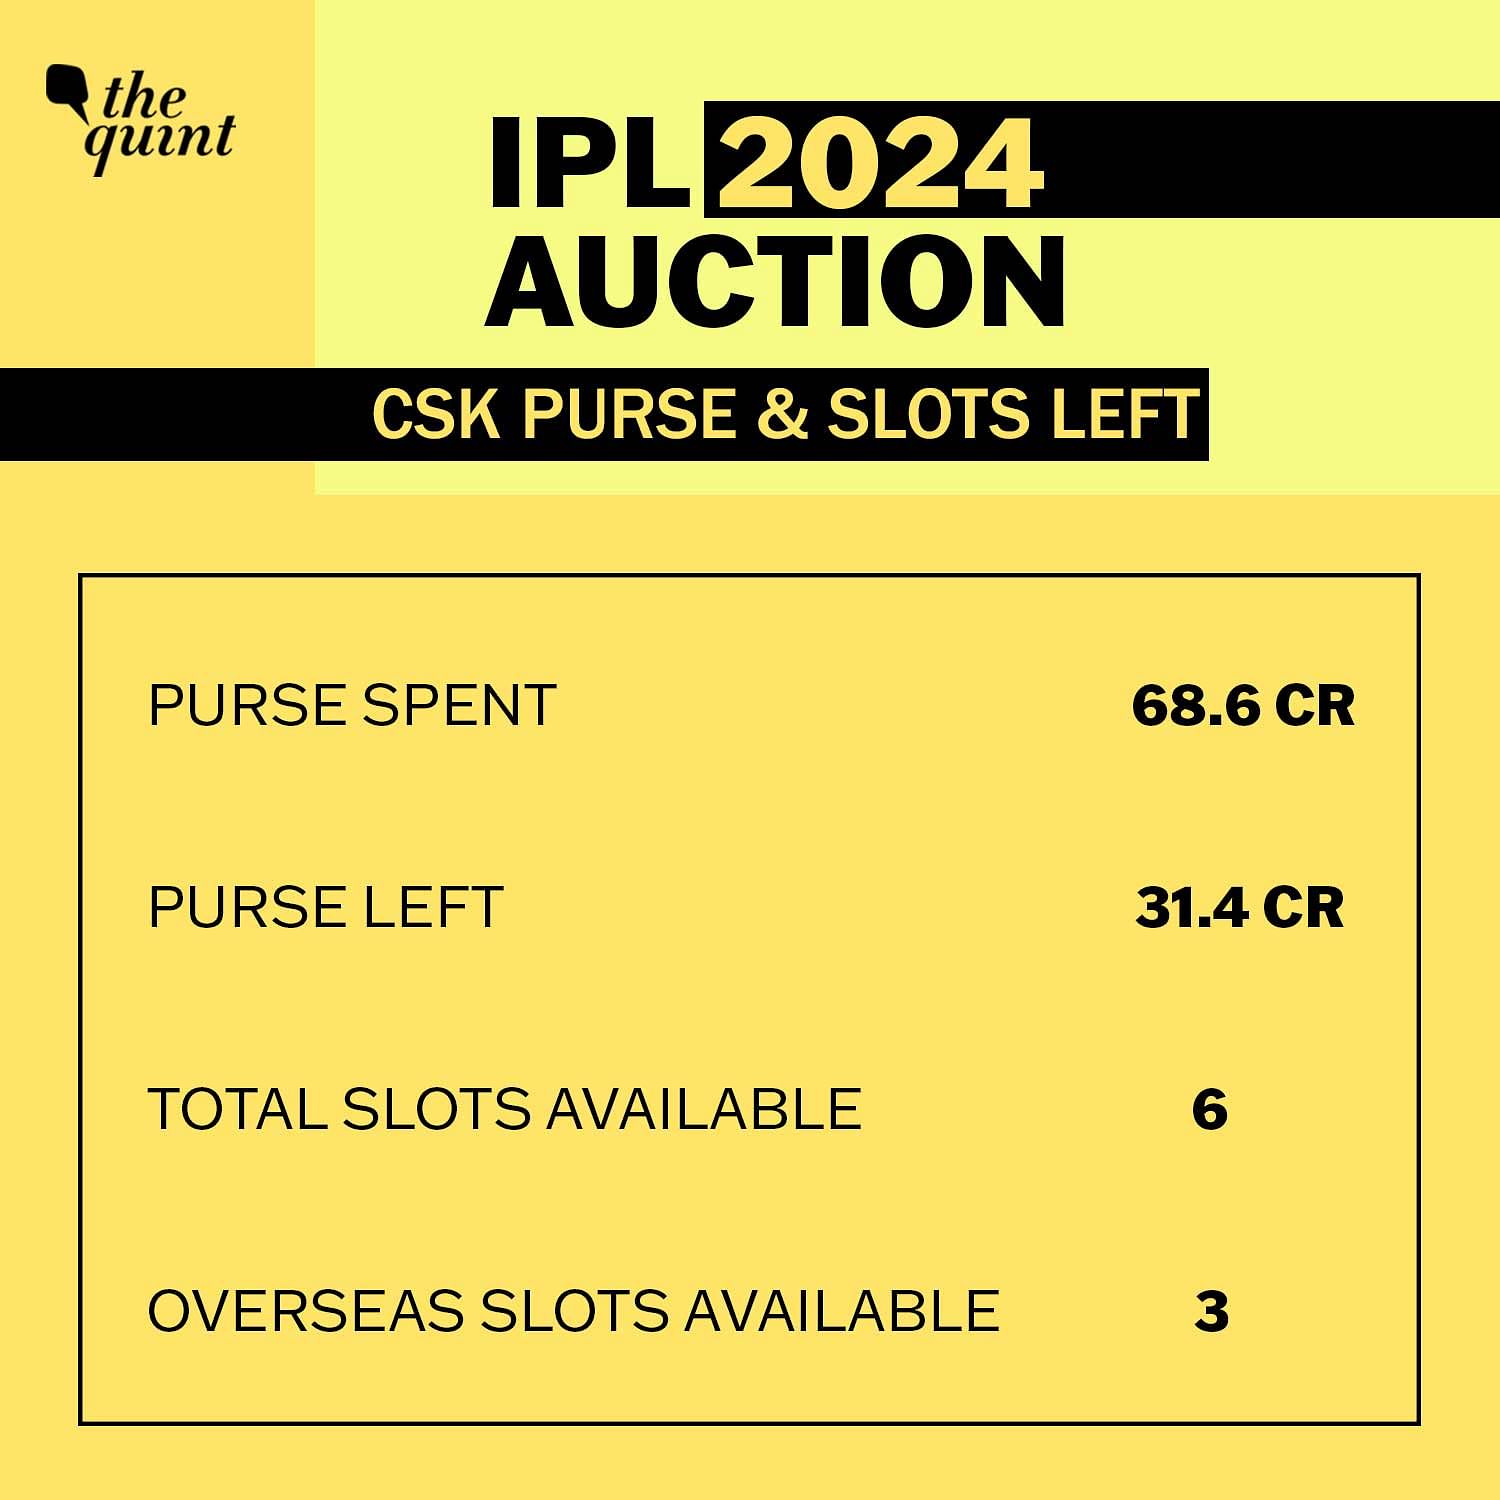 IPL Auction 2024: What Should Chennai Super Kings Do? – Strategy, Targets,  Purse & Slots Left